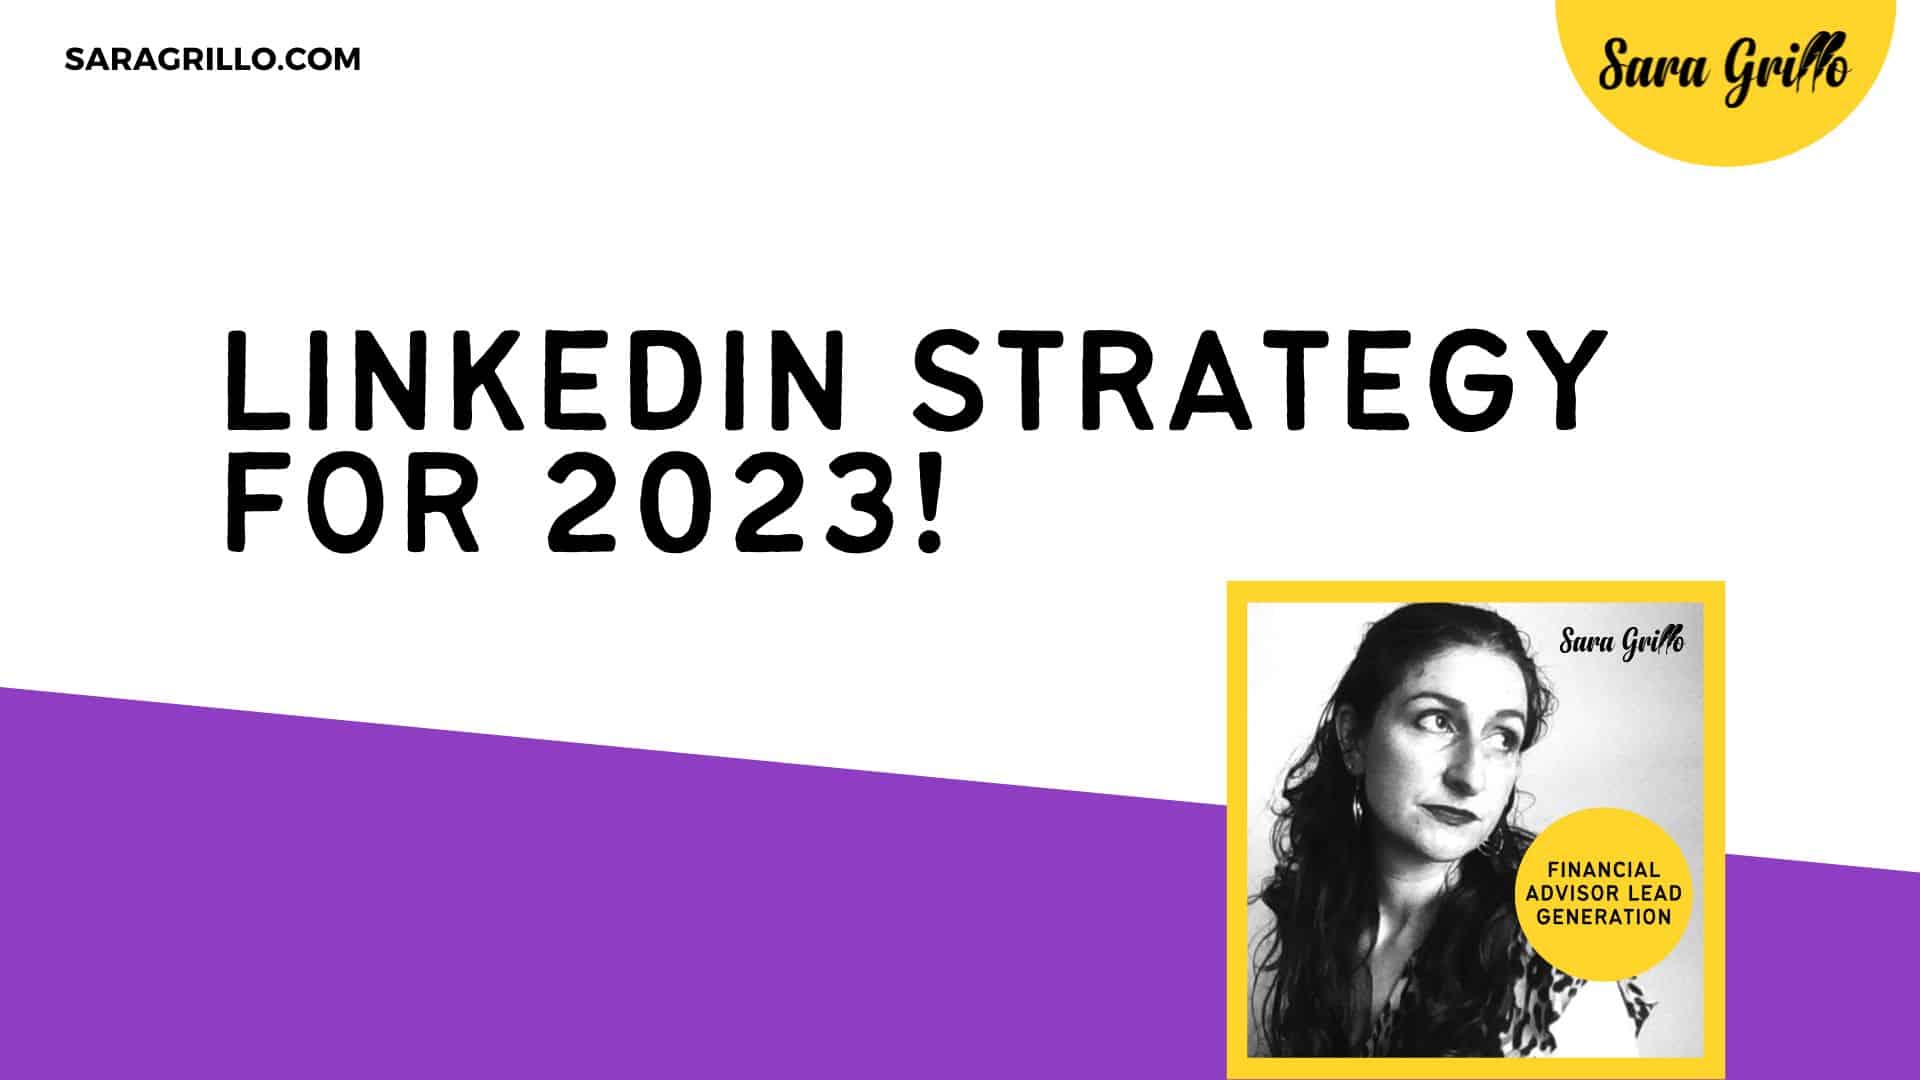 This blog talks about LinkedIn strategy for 2023.